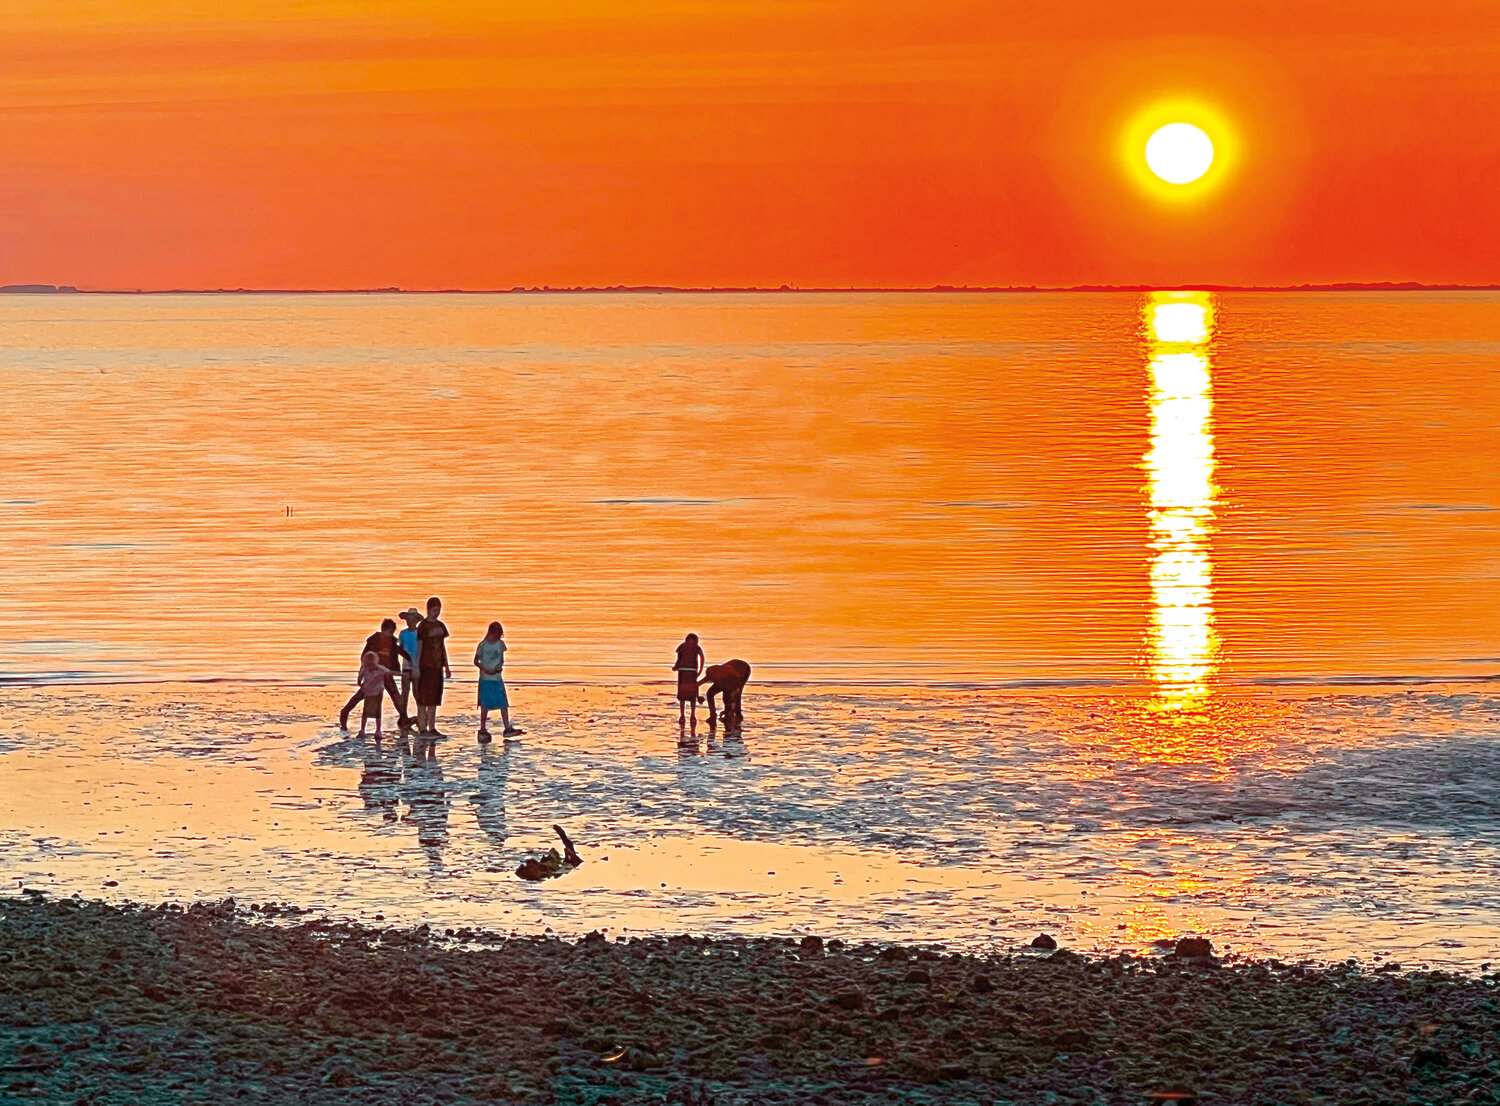 A fiery orange sunset brightened the sky over Semiahmoo Bay on the evening of May 15. Beach-goers at Semiahmoo Park found relief from unusually high temperatures during a heat advisory that the National Weather Service issued for areas of western Washington from May 13 through May 15.